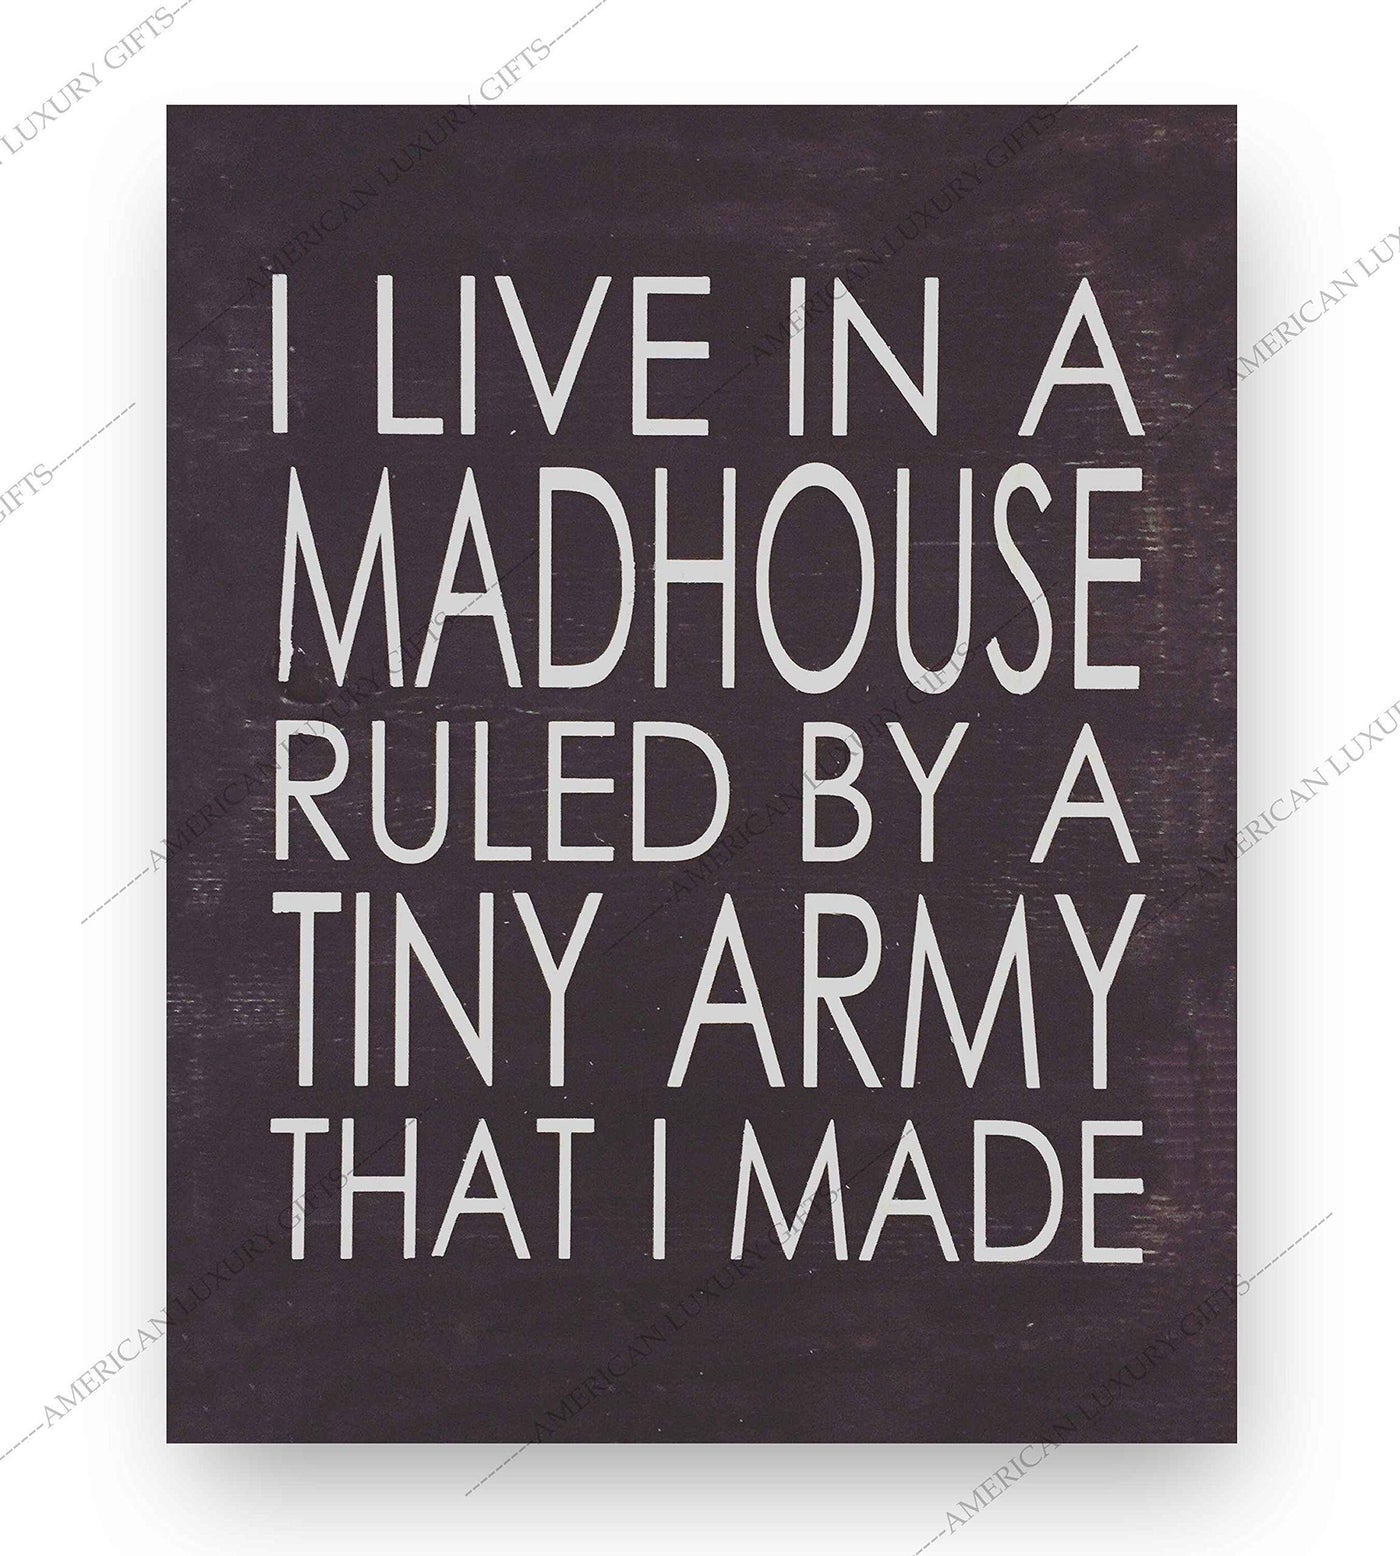 I Live In A Madhouse Ruled By A Tiny Army Funny Wall Sign -8 x 10" Rustic Typographic Art Print-Ready to Frame. Humorous Family Decor for Home-Farmhouse. Great Parenting Sign and Fun Gift for ALL!